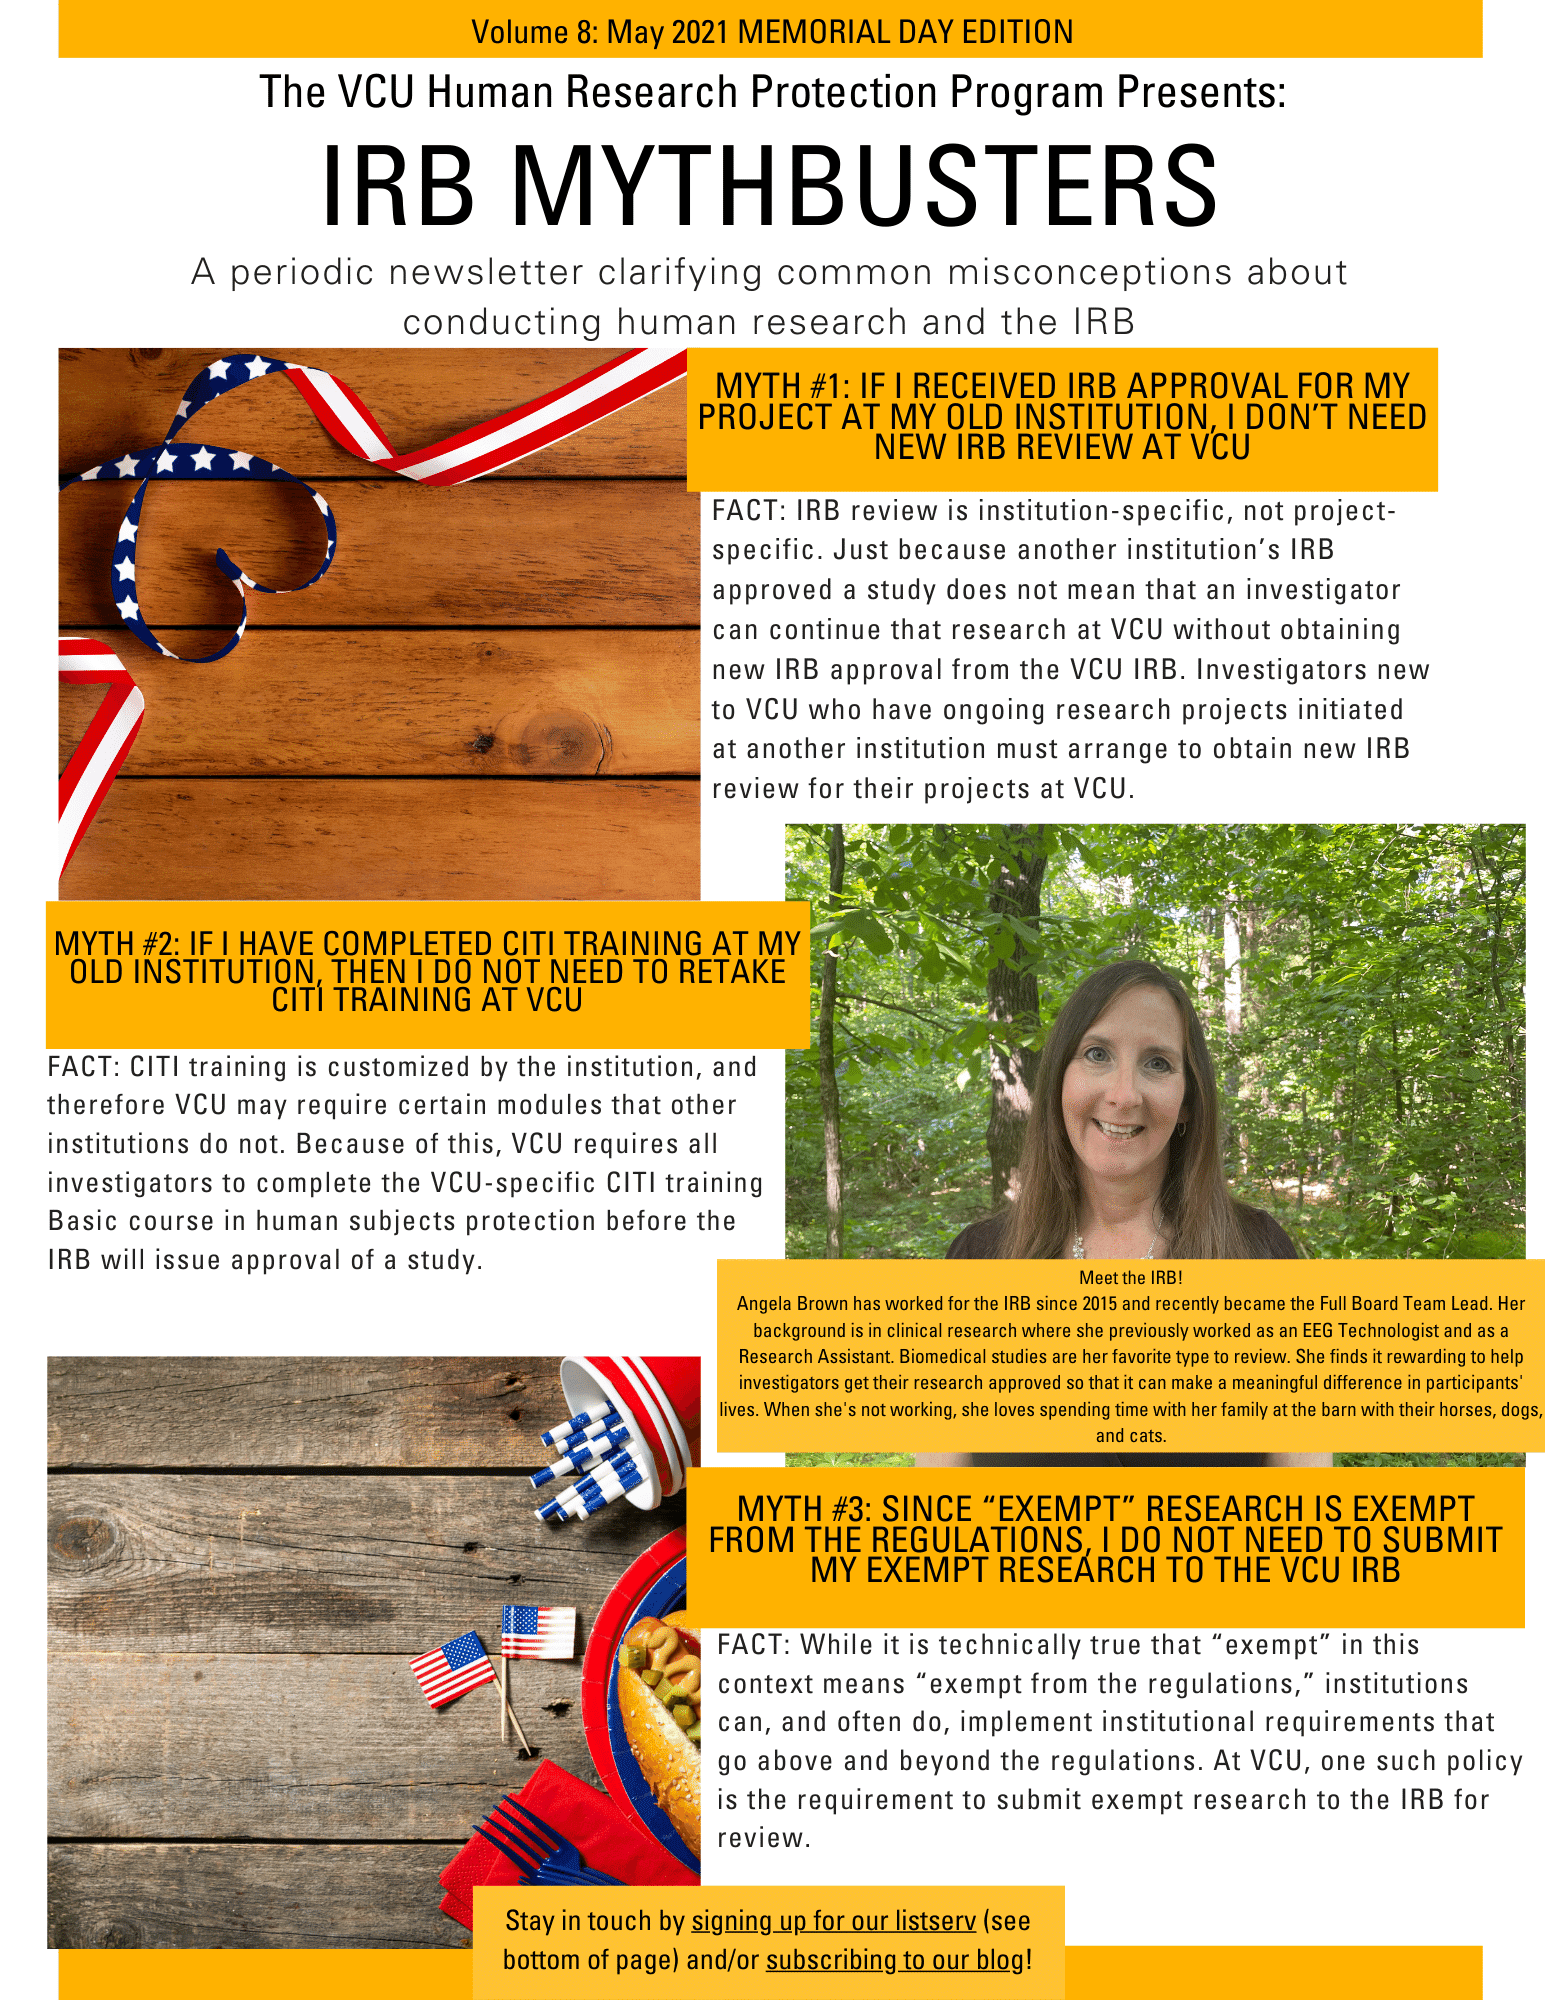 This is an image of the IRB Mythbusters Newsletter. It includes two Memorial Day-themed images, and a third image, which shows a woman standing in a cluster of trees. The caption to that picture says “Meet the IRB! Angela Brown has worked for the IRB since 2015 and recently became the Full Board Team Lead. Her background is in clinical research where she previously worked as an EEG Technologist and as a Research Assistant. Biomedical studies are her favorite type to review. She finds it rewarding to help investigators get their research approved so that it can make a meaningful difference in participants' lives. When she's not working, she loves spending time with her family at the barn with their horses, dogs, and cats.” The rest of the newsletter contains the same myths and facts as the blog post.